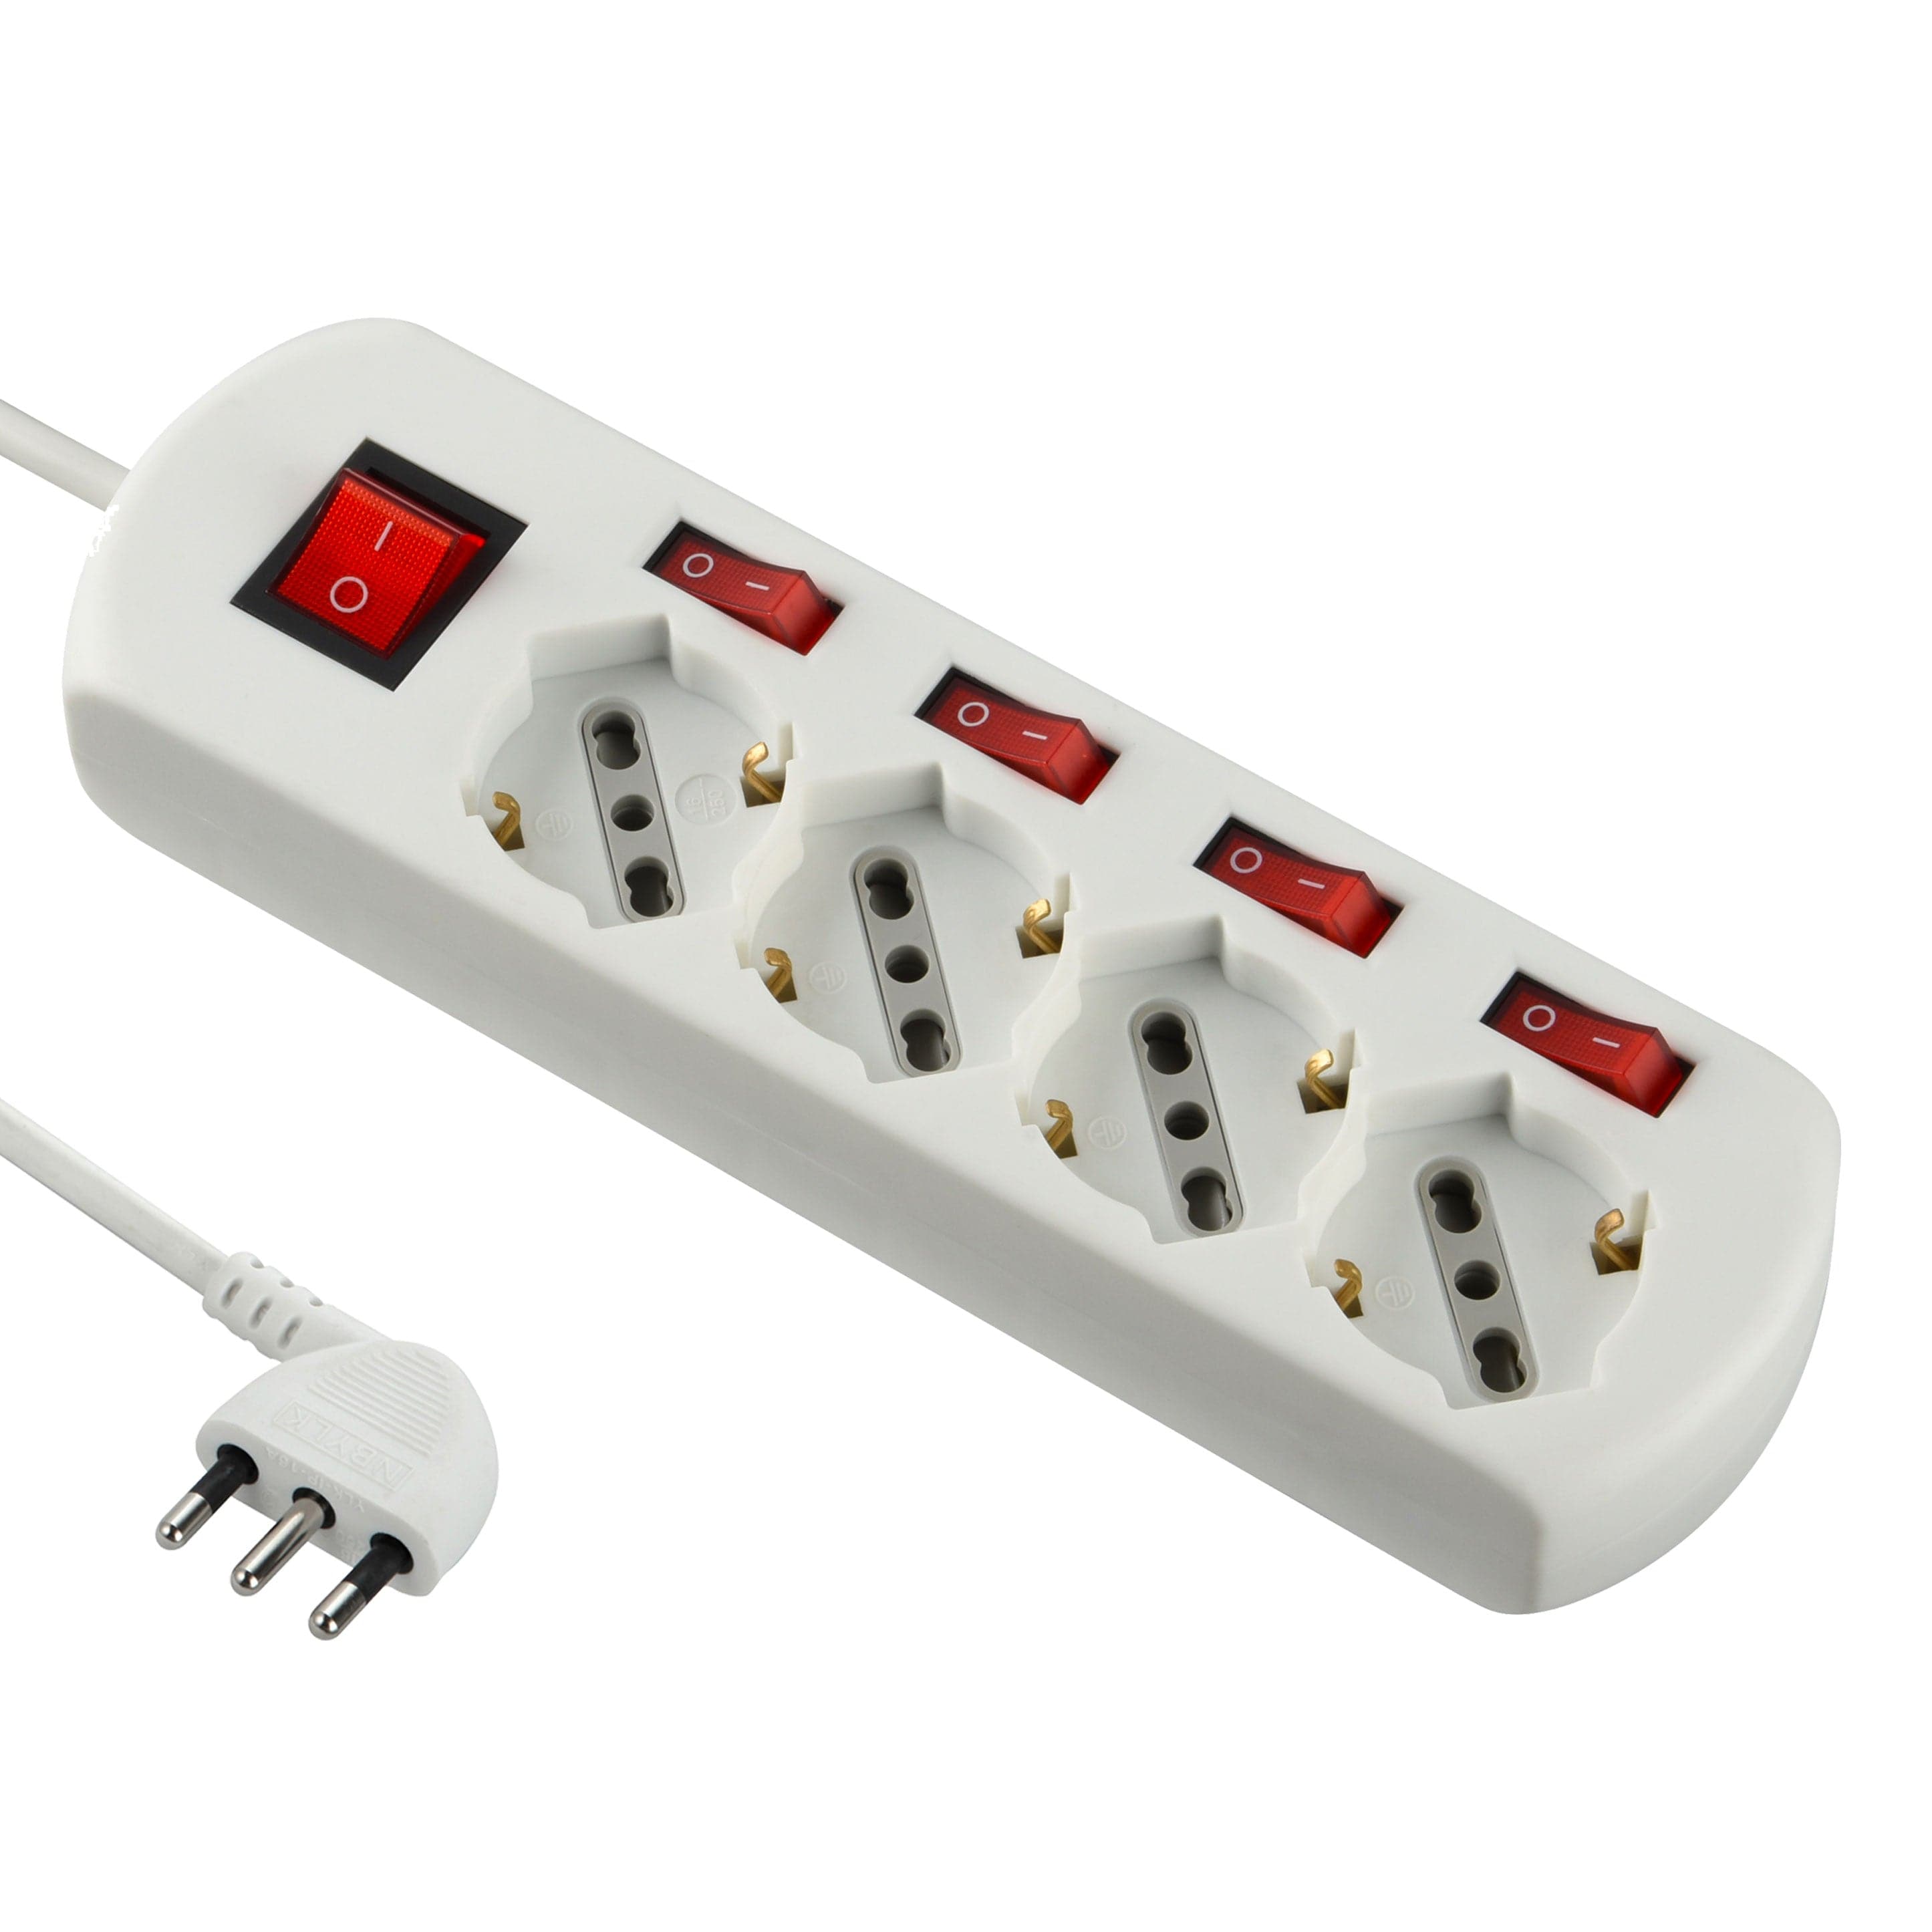 MULTI-SOCKET PLUG 16A 4-WAY 10/16A CABLE 1,5MT WITH 5 SWITCHES WHITE